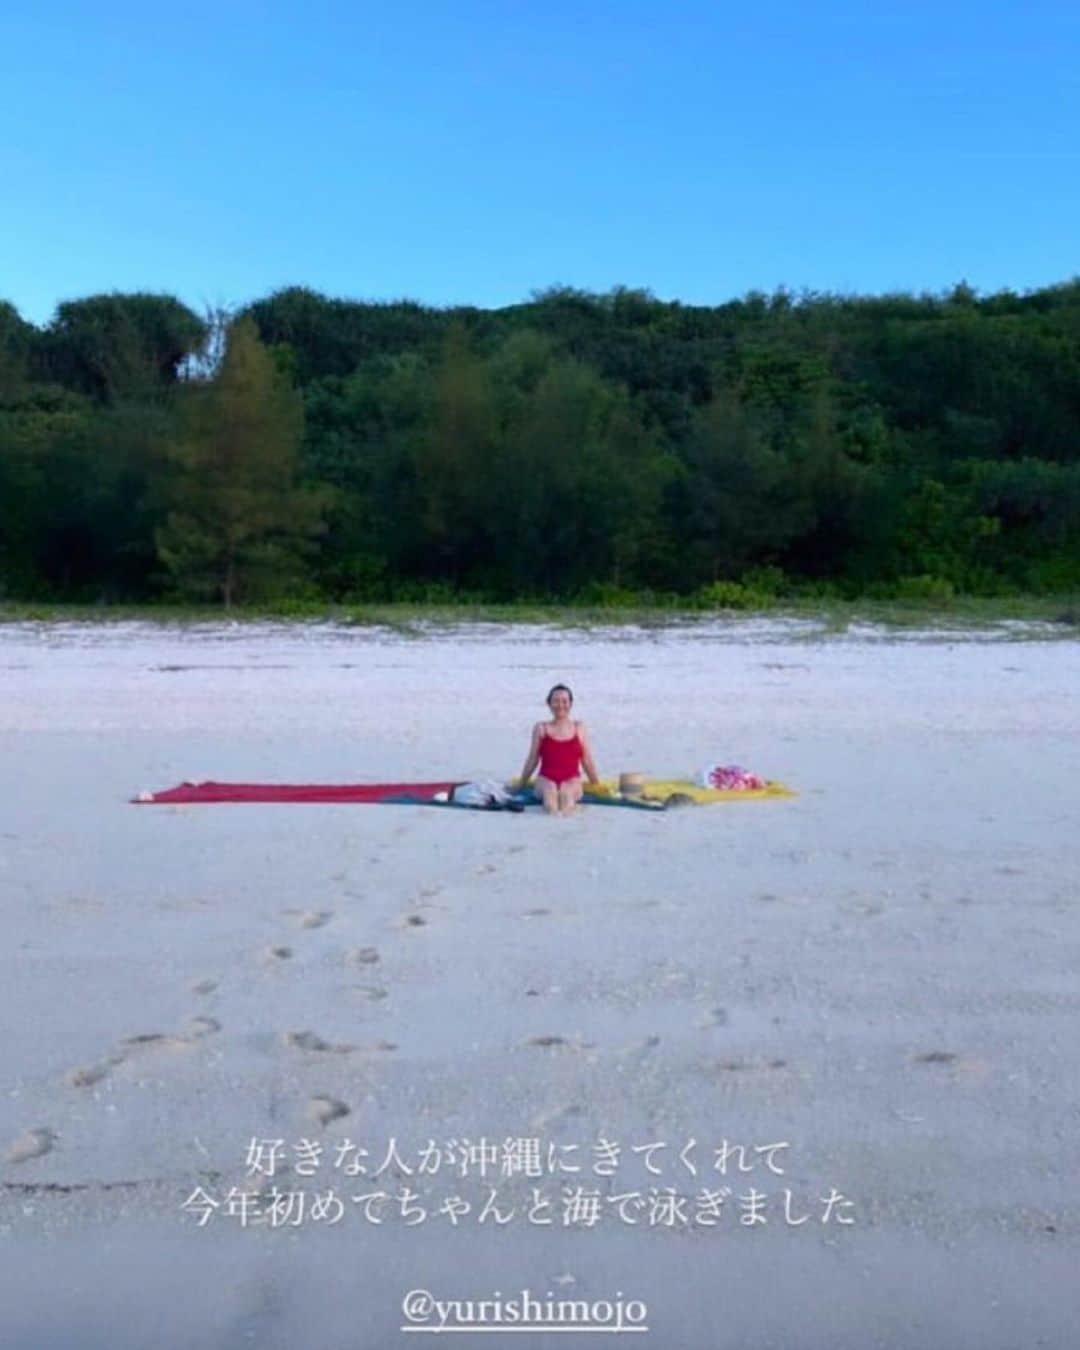 下條ユリさんのインスタグラム写真 - (下條ユリInstagram)「🌌 宮沢賢治『インドラの網』 この夏キッタちゃんが教えてくれた。(日本語↓あるよ)  Kitta @yuko_kitta taught me about the profound "Indra's Net" by Kenji Miyazawa this summer.  We flipped upside down and watched the sunset rise into the Pacific Ocean together.  Floating like fetuses and cooking colorful Okinawan vegetables, we shared the stories of our loved ones.  She took me to a secret cove of the great mother rock. The mothership has protected our planet since it began, telling us to believe in ourselves.   Scheming some super colorful gangsta badass best bonfire ritual ever and laughing out loud so hard by confirming the absolute right way to do it together.   After more than a year of heavy cancer treatment that regenerated every cell of my body, followed by Rudy becoming a spirit, I became empty for a while.  "Can I come over ?"  I asked. Kitta kindly ( maybe more naturally) accepted nothing but my intuitive sudden proposal to visit her in Okinawa from New York. It was almost our first hangout session. It eventually guided us to the portal, which opened for Indra's Net.  I pray. One day, everyone in the world could interconnect by exchanging shining jewels that each of us inherent and be able to interreflect on each other's light.  Thank you, Kitta, for connecting me with "Indra's Net"  As if unraveling, Like crossing the Milky Way, I was able to make this piece.   With a very special ink made and gifted to me by Jason Logan  @torontoinkcompany   On view @farmoon_kyoto  Until Nov 26th 🌌  逆さの夕陽が太平洋の中に昇っていくのをひっくり返って一緒に見た。  胎児の様に浮かんだり、綺麗な色の野菜を料理したりしながら、愛する人たちの話をした。  太古からこの惑星を守る岩が鎮座する秘密の入り江に招いてくれて、母なる岩に自分を信じて大丈夫、と言ってもらえた。  「はんぱないはんぱもんのお焚き上げ」なんて祭事を企み、お腹の底から一緒に笑って、正しいおとしまえのつけ方に納得した。  全身の細胞が生まれ変わるような癌の治療を1年以上して、その後るーちんが魂になって、しばらくの間わたしは空っぽになっていた。  「行っていい？」 ただ直感だけに動かされ、NYからいきなり沖縄にやって来たわたしを親切に(いや自然に)受け止めてくれたキッタちゃん、ほとんどお初のわたしたちのセッション。結果それは、わたしたちを『インドラの網』へと開かれたポータルへ導いてくれた。  祈る。 もし世界中の誰もが、それぞれ生まれながらに持つ宝珠を交換し合う事で繋がり、その光で互いに映し合っていけたなら。  キッタちゃん 『インドラの網』 に繋げてくれてありがとう。  解けるように、 天の川を渡るように、 この絵が描けたよ。  @torontoinkcompany から贈られた特別なインクでね。  下條ユリ　 線と点と　展   Yuri Shimojo  Exhibition in Kyoto  “A line  and  a dot  and”   〜　2023. 11.26 (日)  @farmoon_kyoto  Farmoon 茶楼　 左京区北白川東久保田町九 Kyoto Japan 🌌  #IndrasNet  #インドラの網」11月14日 10時21分 - yurishimojo